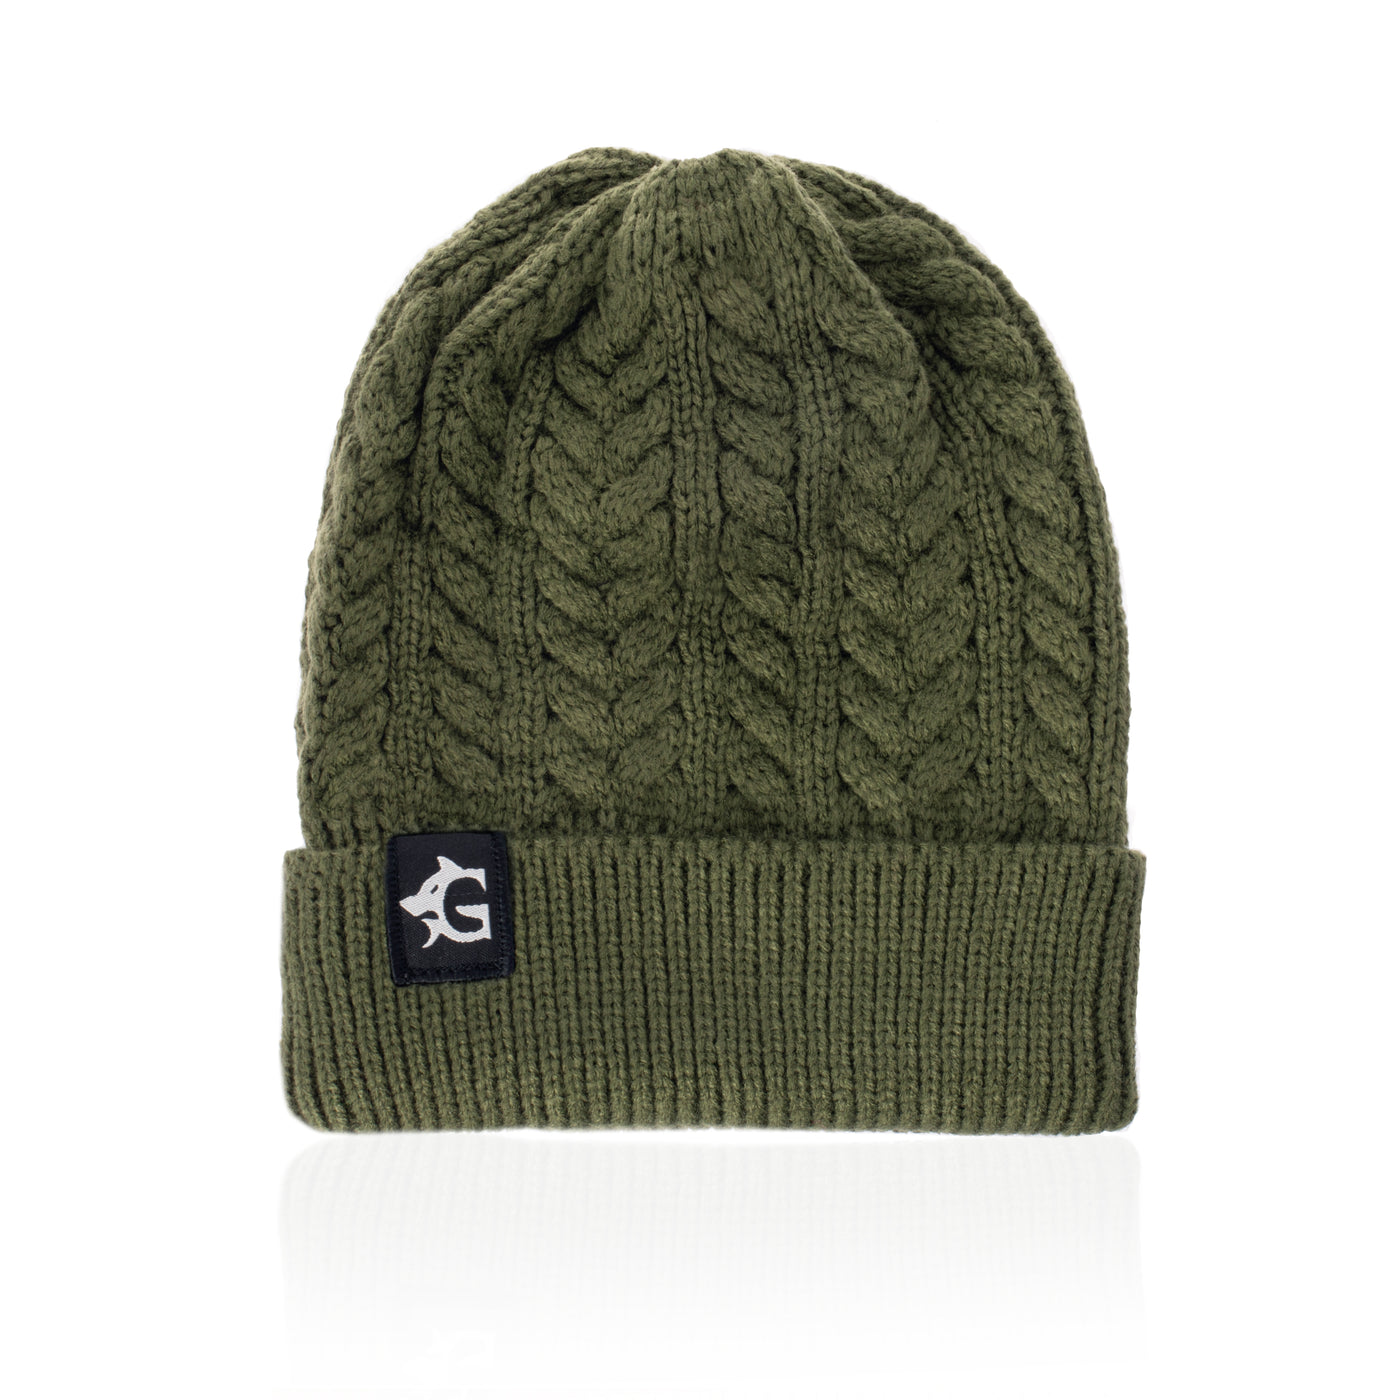 Grimfrost Cable Knit Beanie, Green